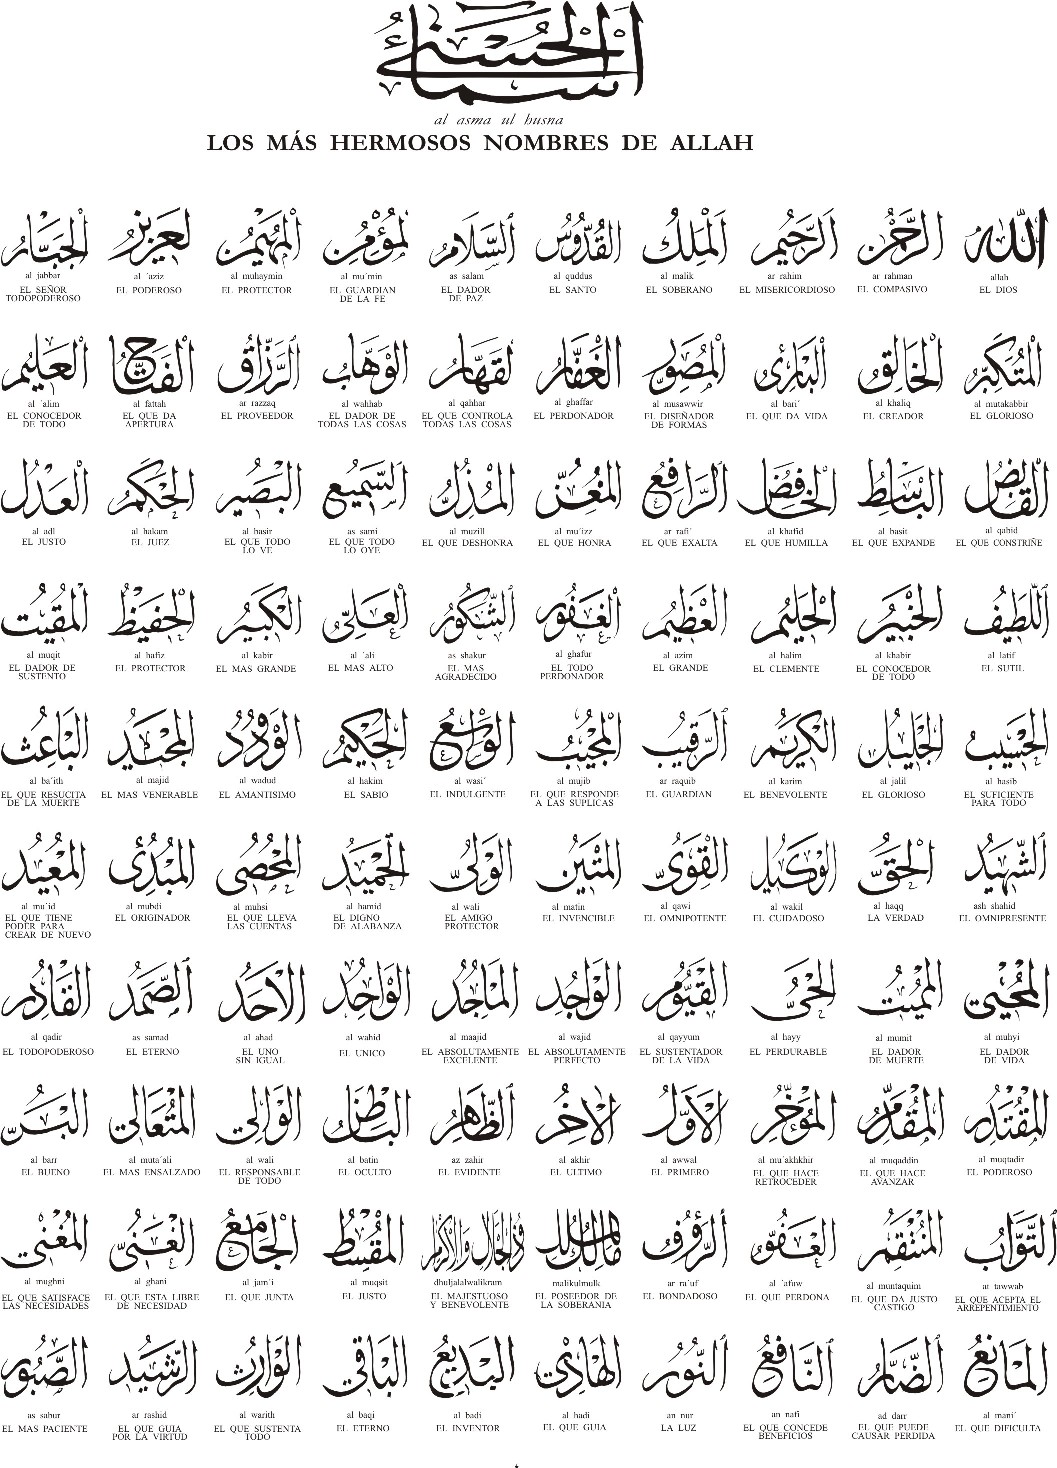 99 names of allah themaker